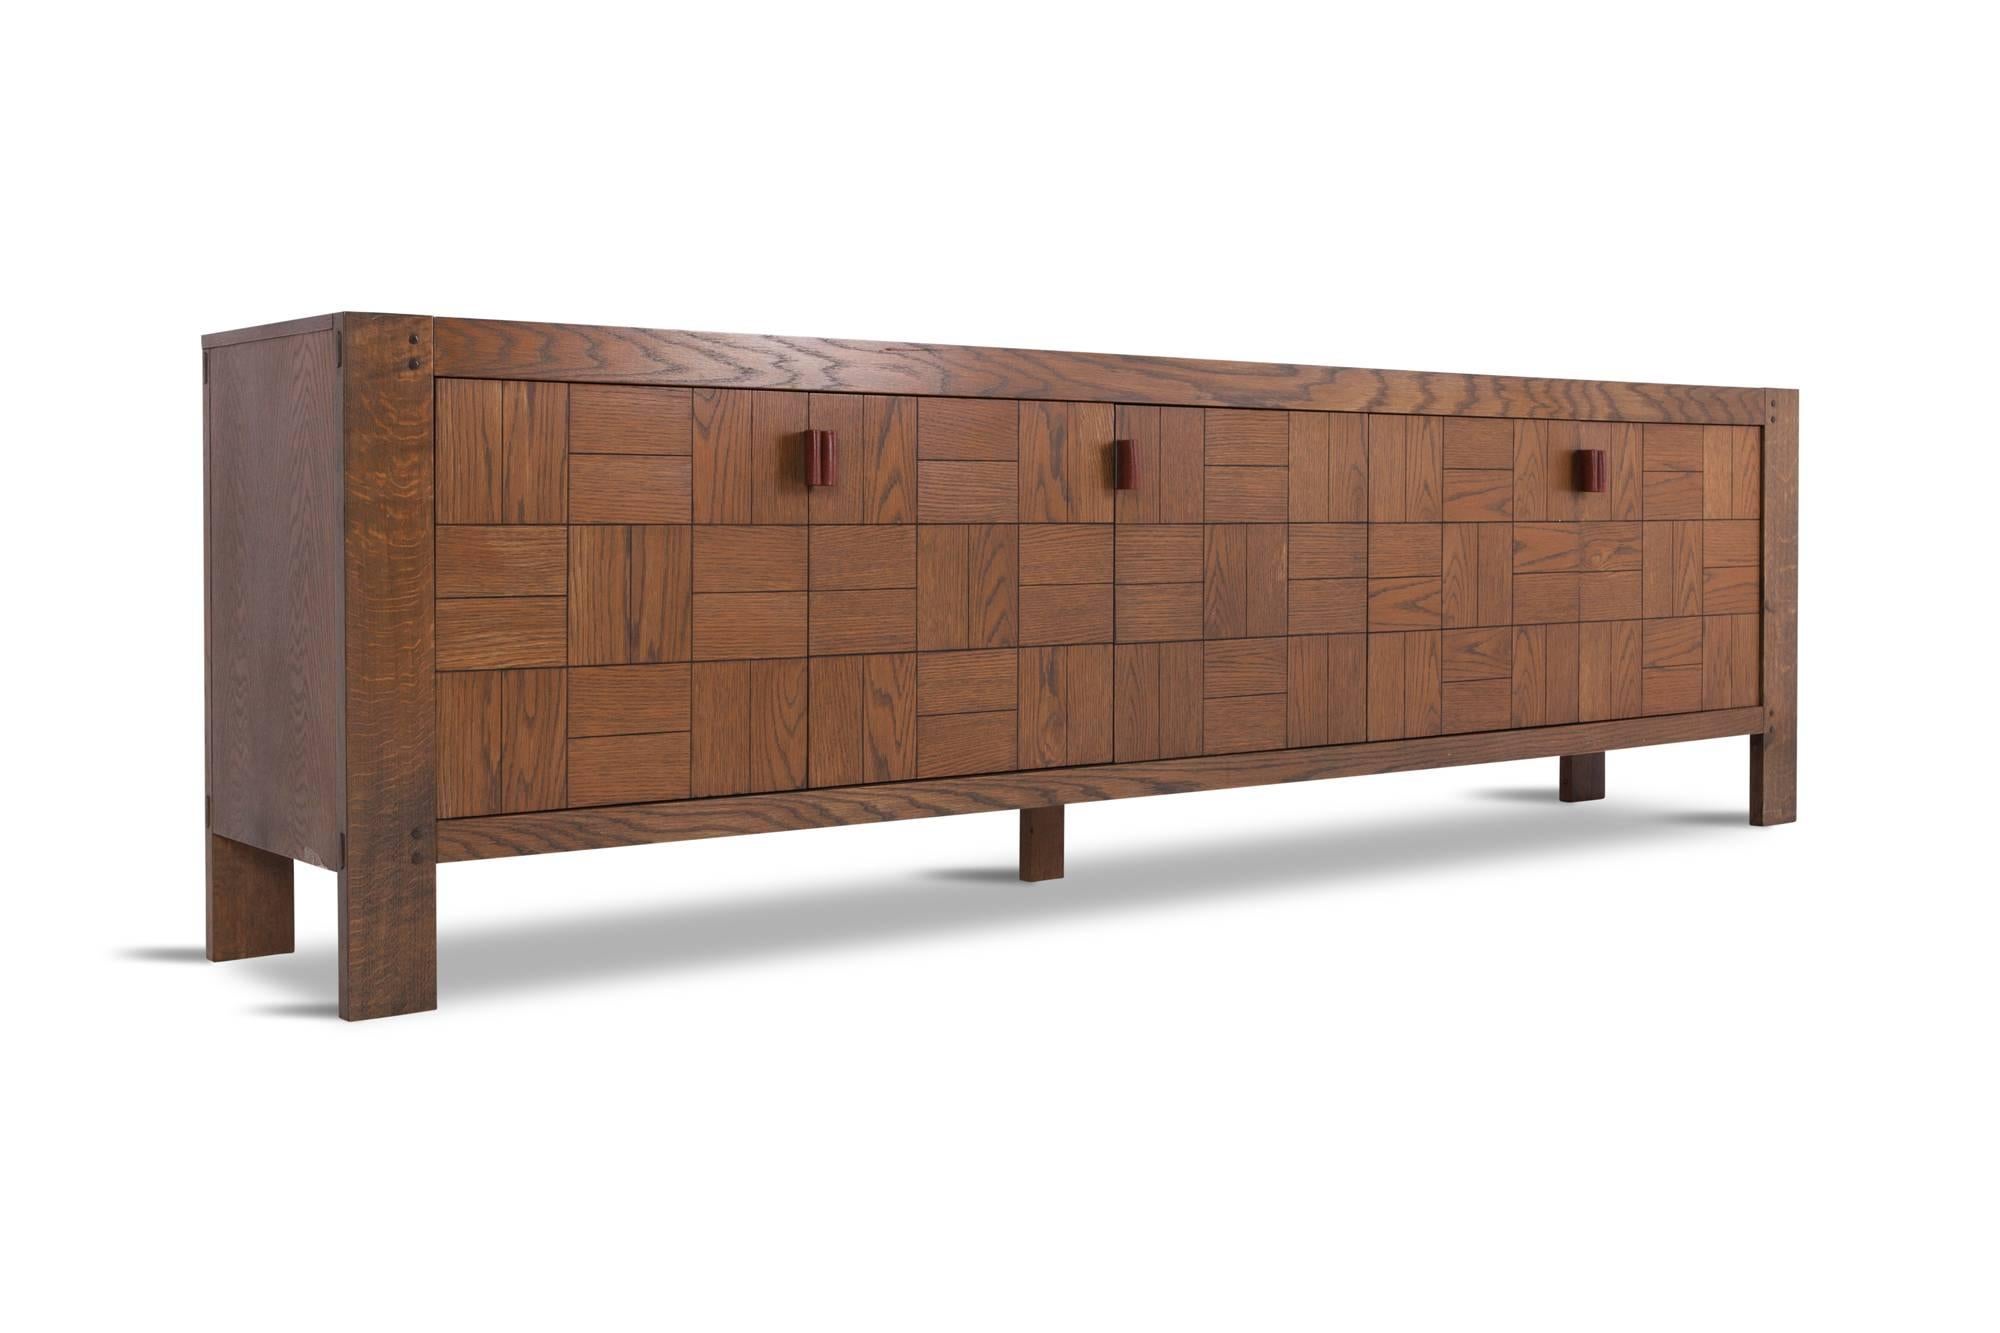 Belgian Brutalist Credenza in Stained Oak with Leather Handles